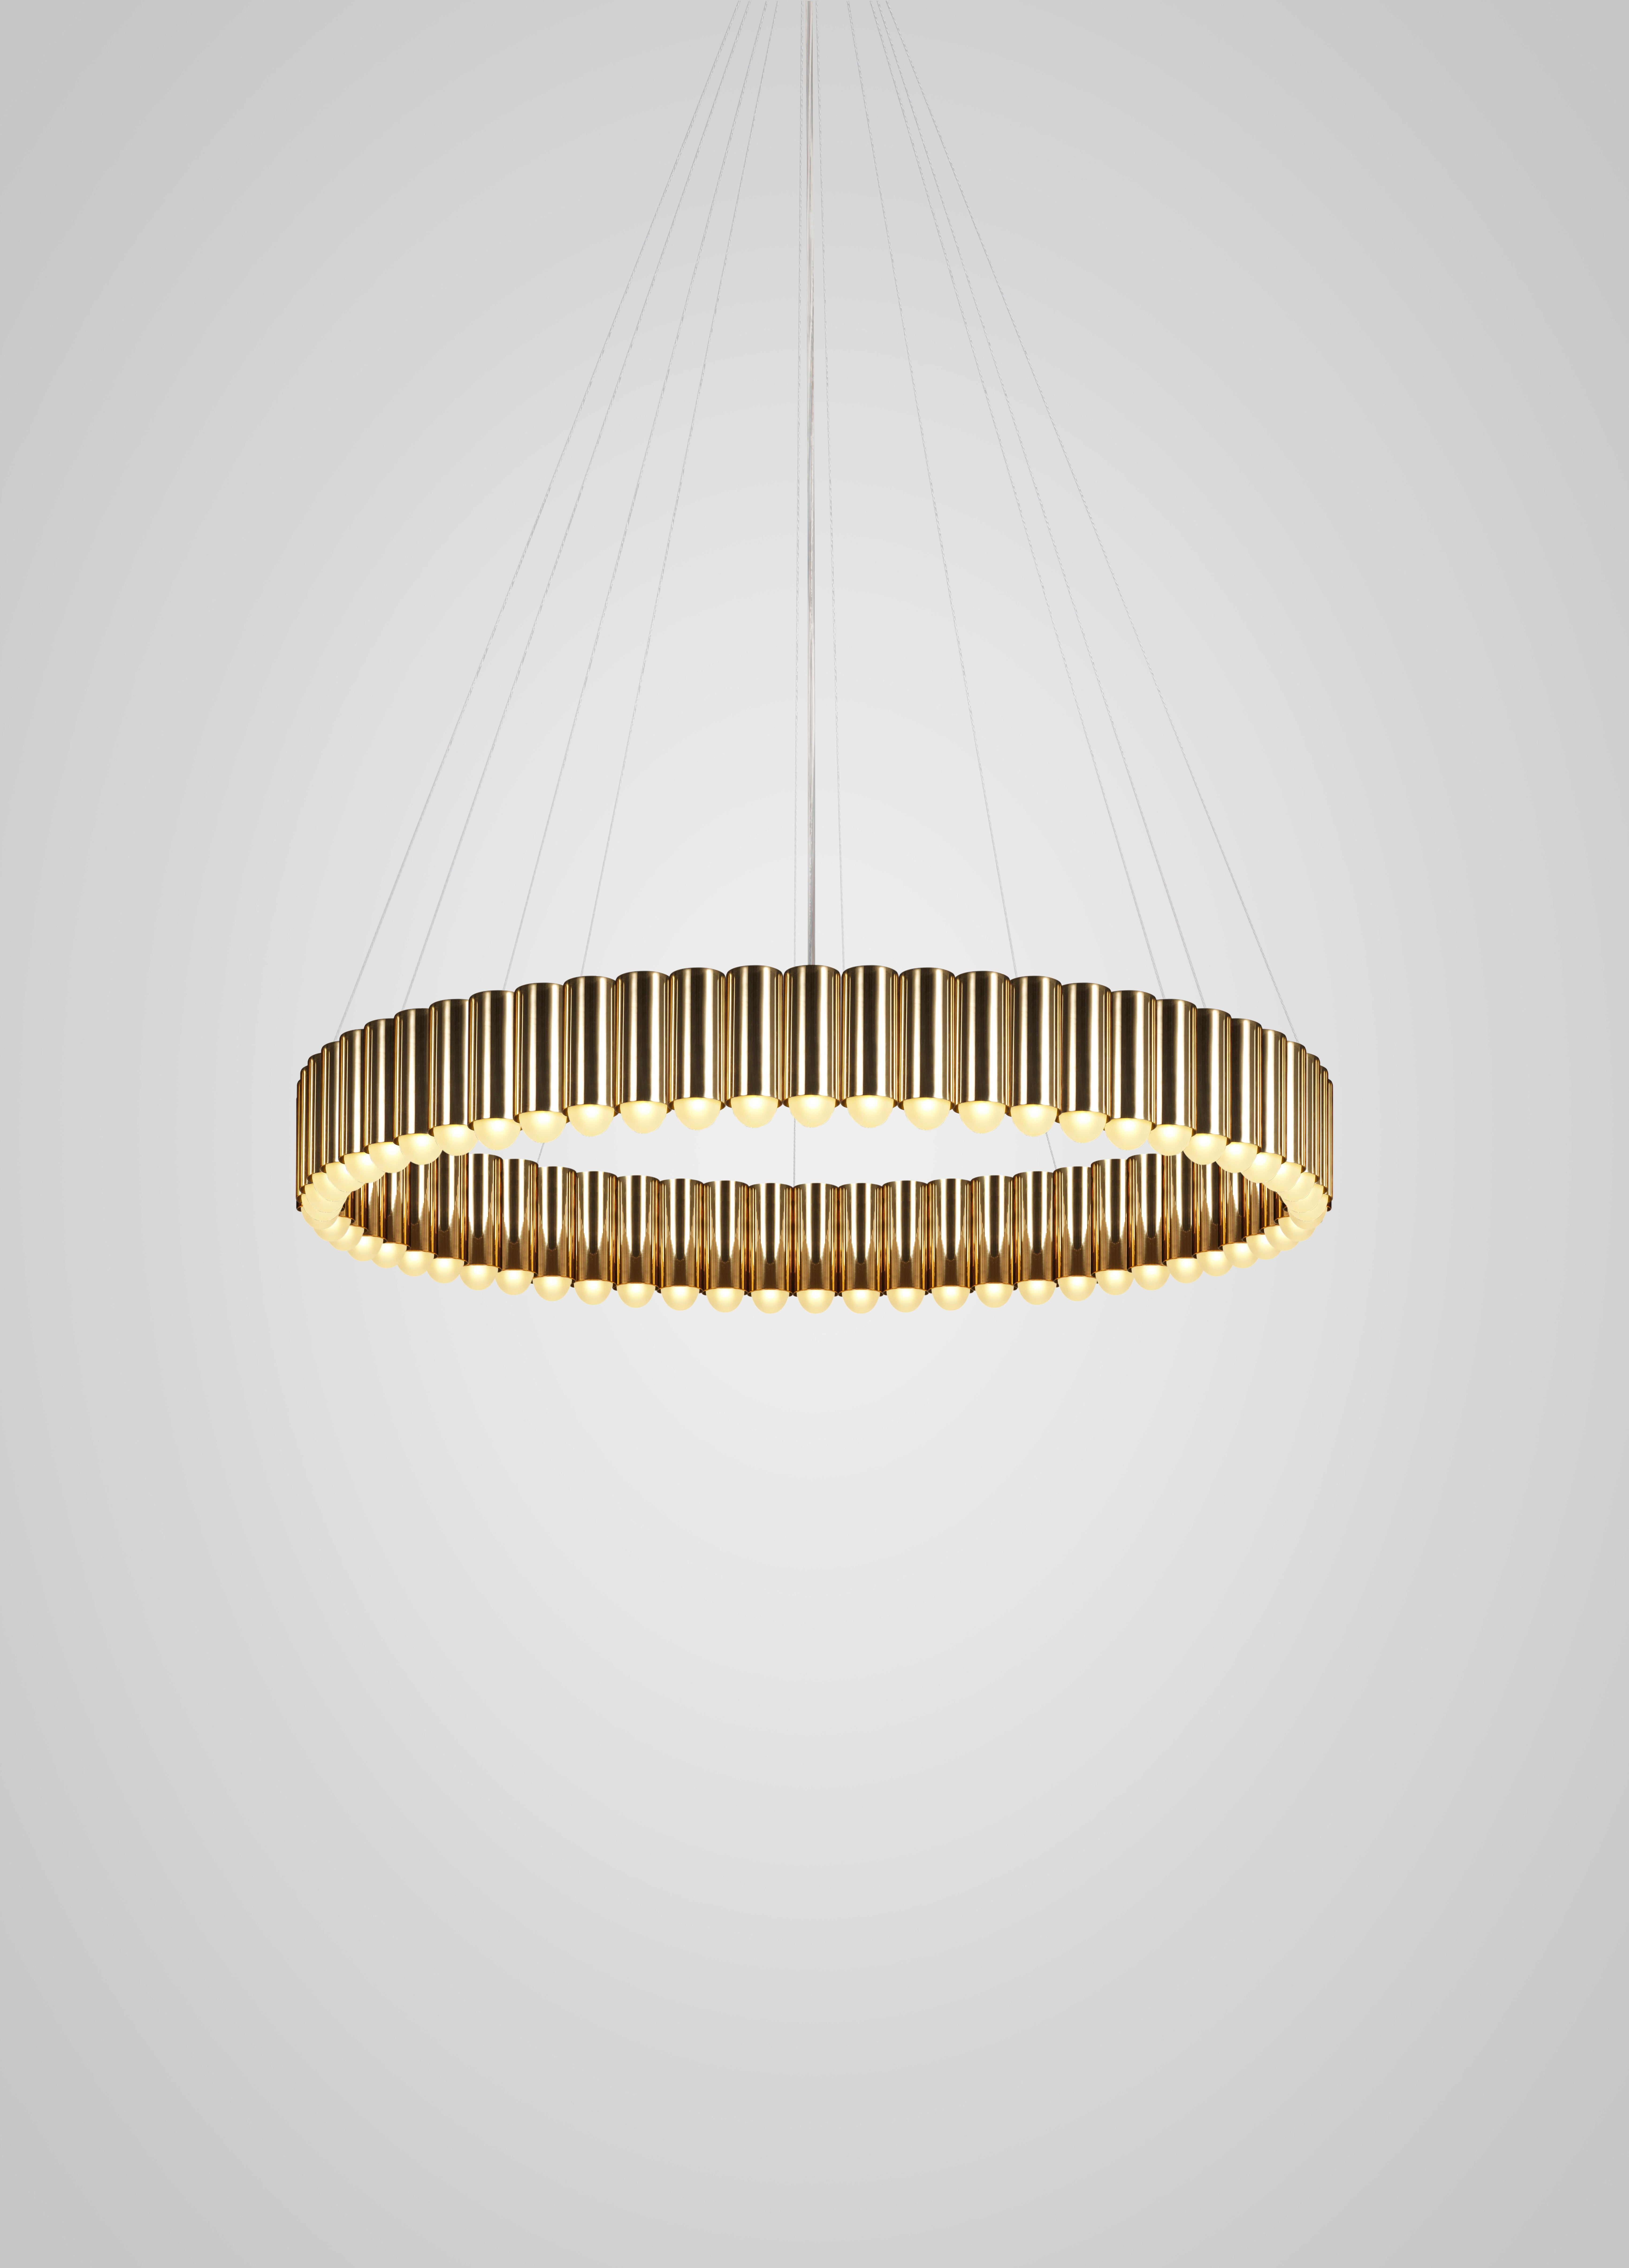 Inspired by the merry-go-round ride of a traditional British fairground, Carousel is a pendant light with a heavyweight presence that floats gently in space. 

Cylinders of gold, chrome, gunmetal or black each house an inset LED lighting element